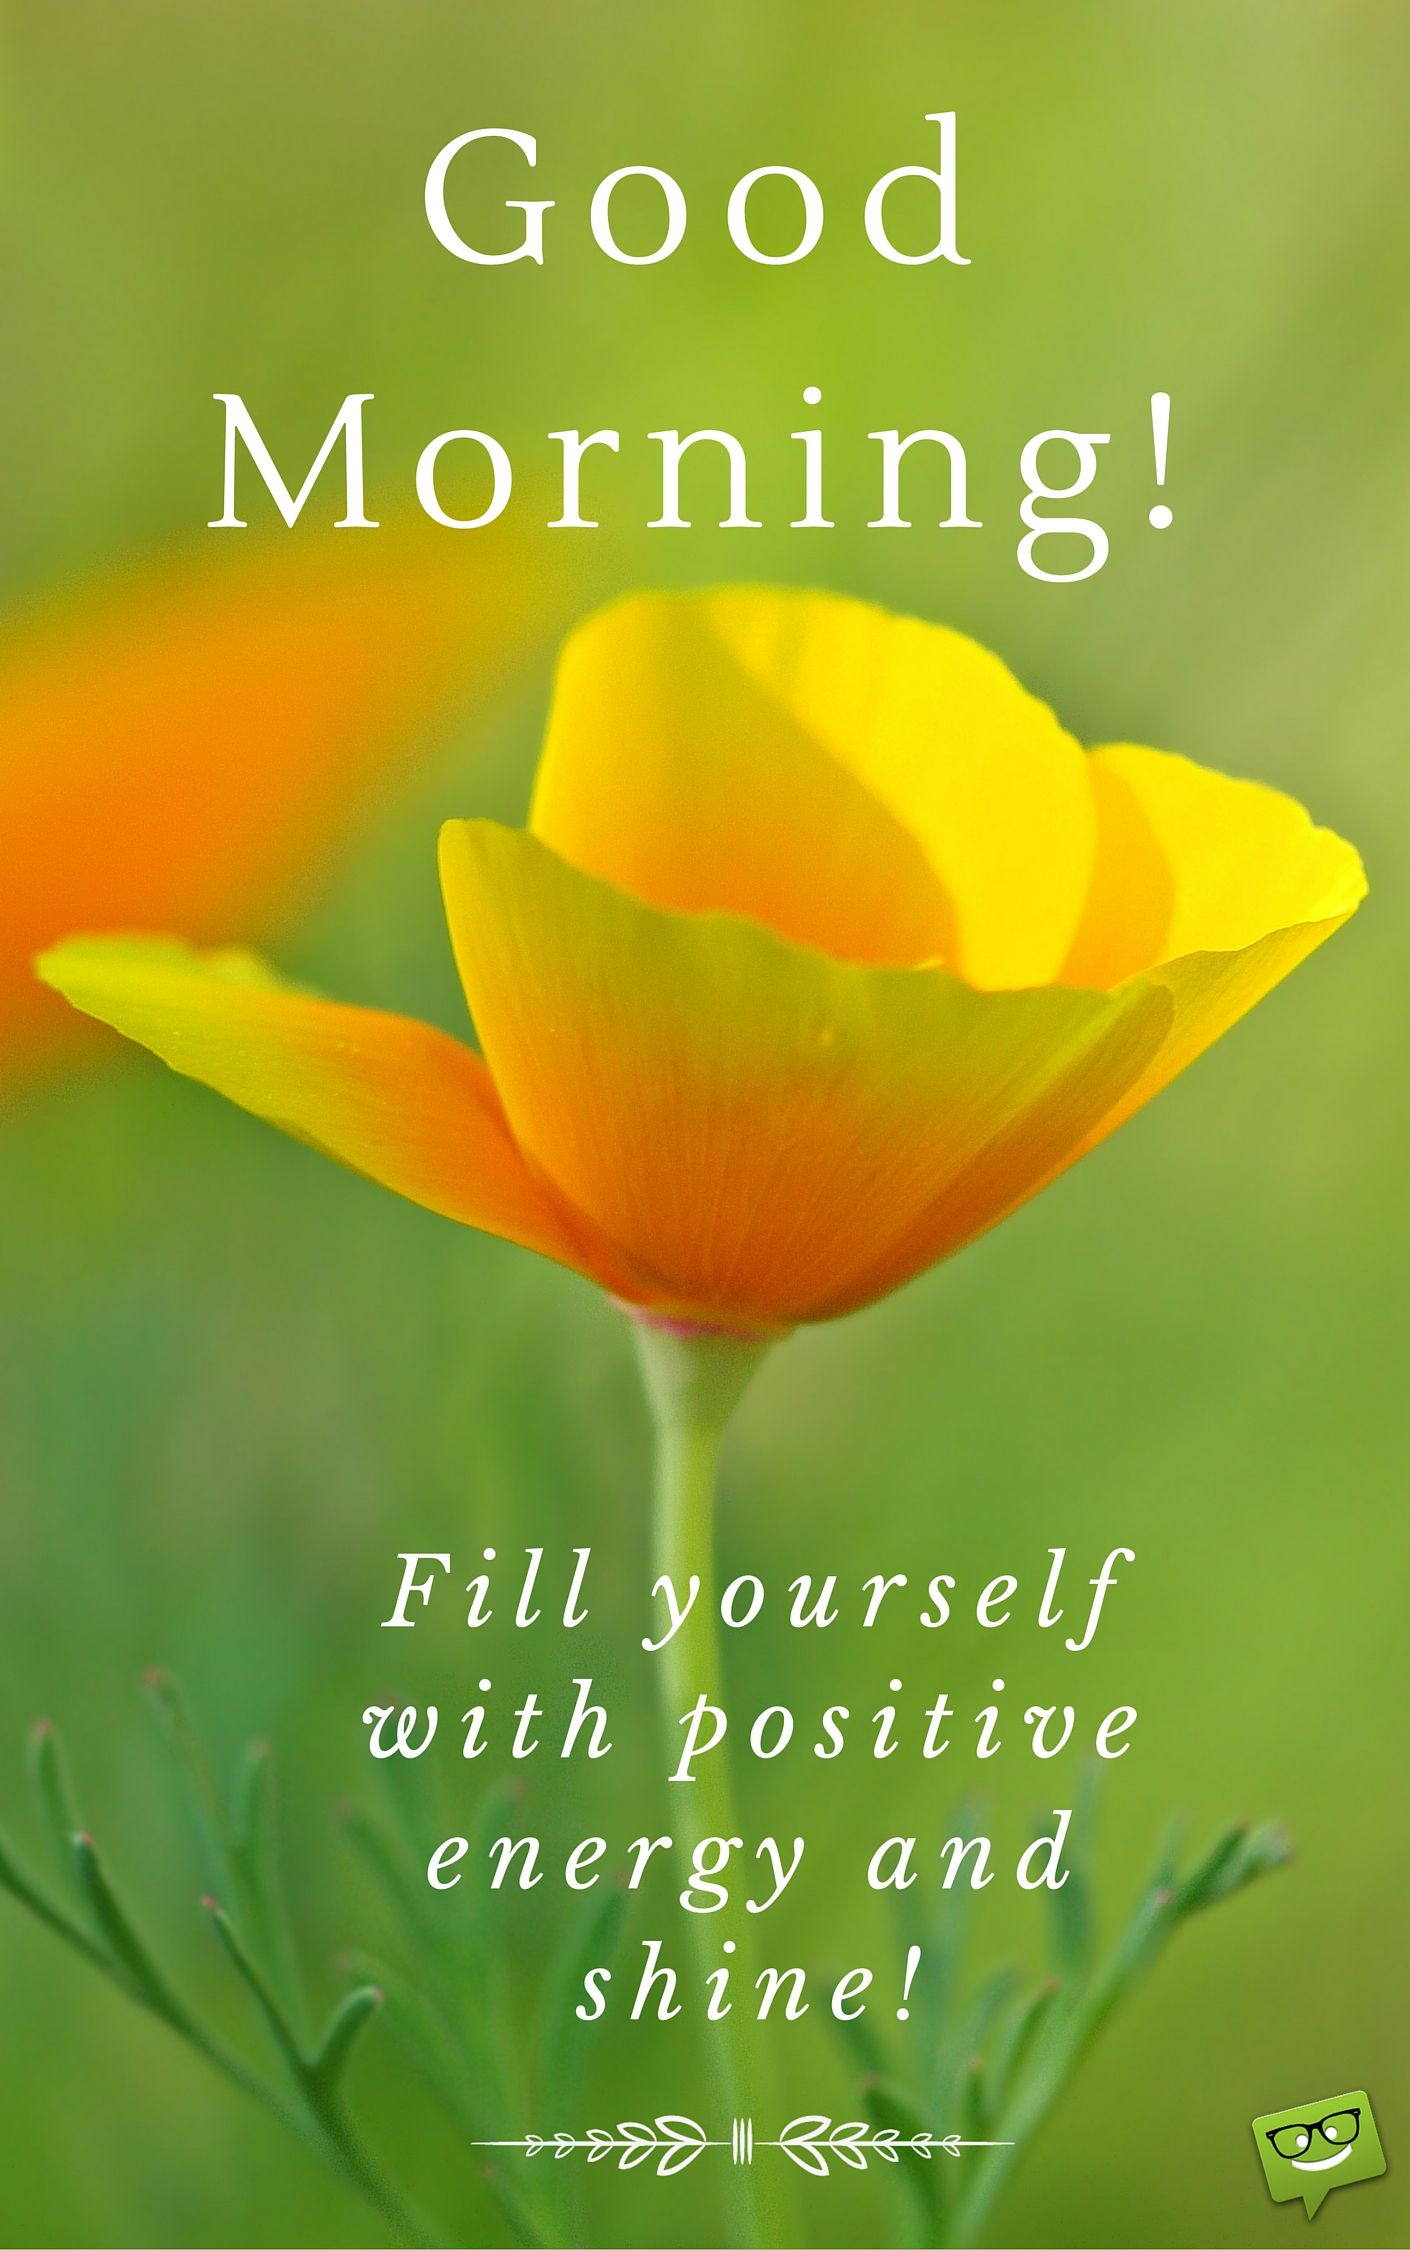 A New Day Starts! - Good Morning Pics | Blessings, Inspirational and ...